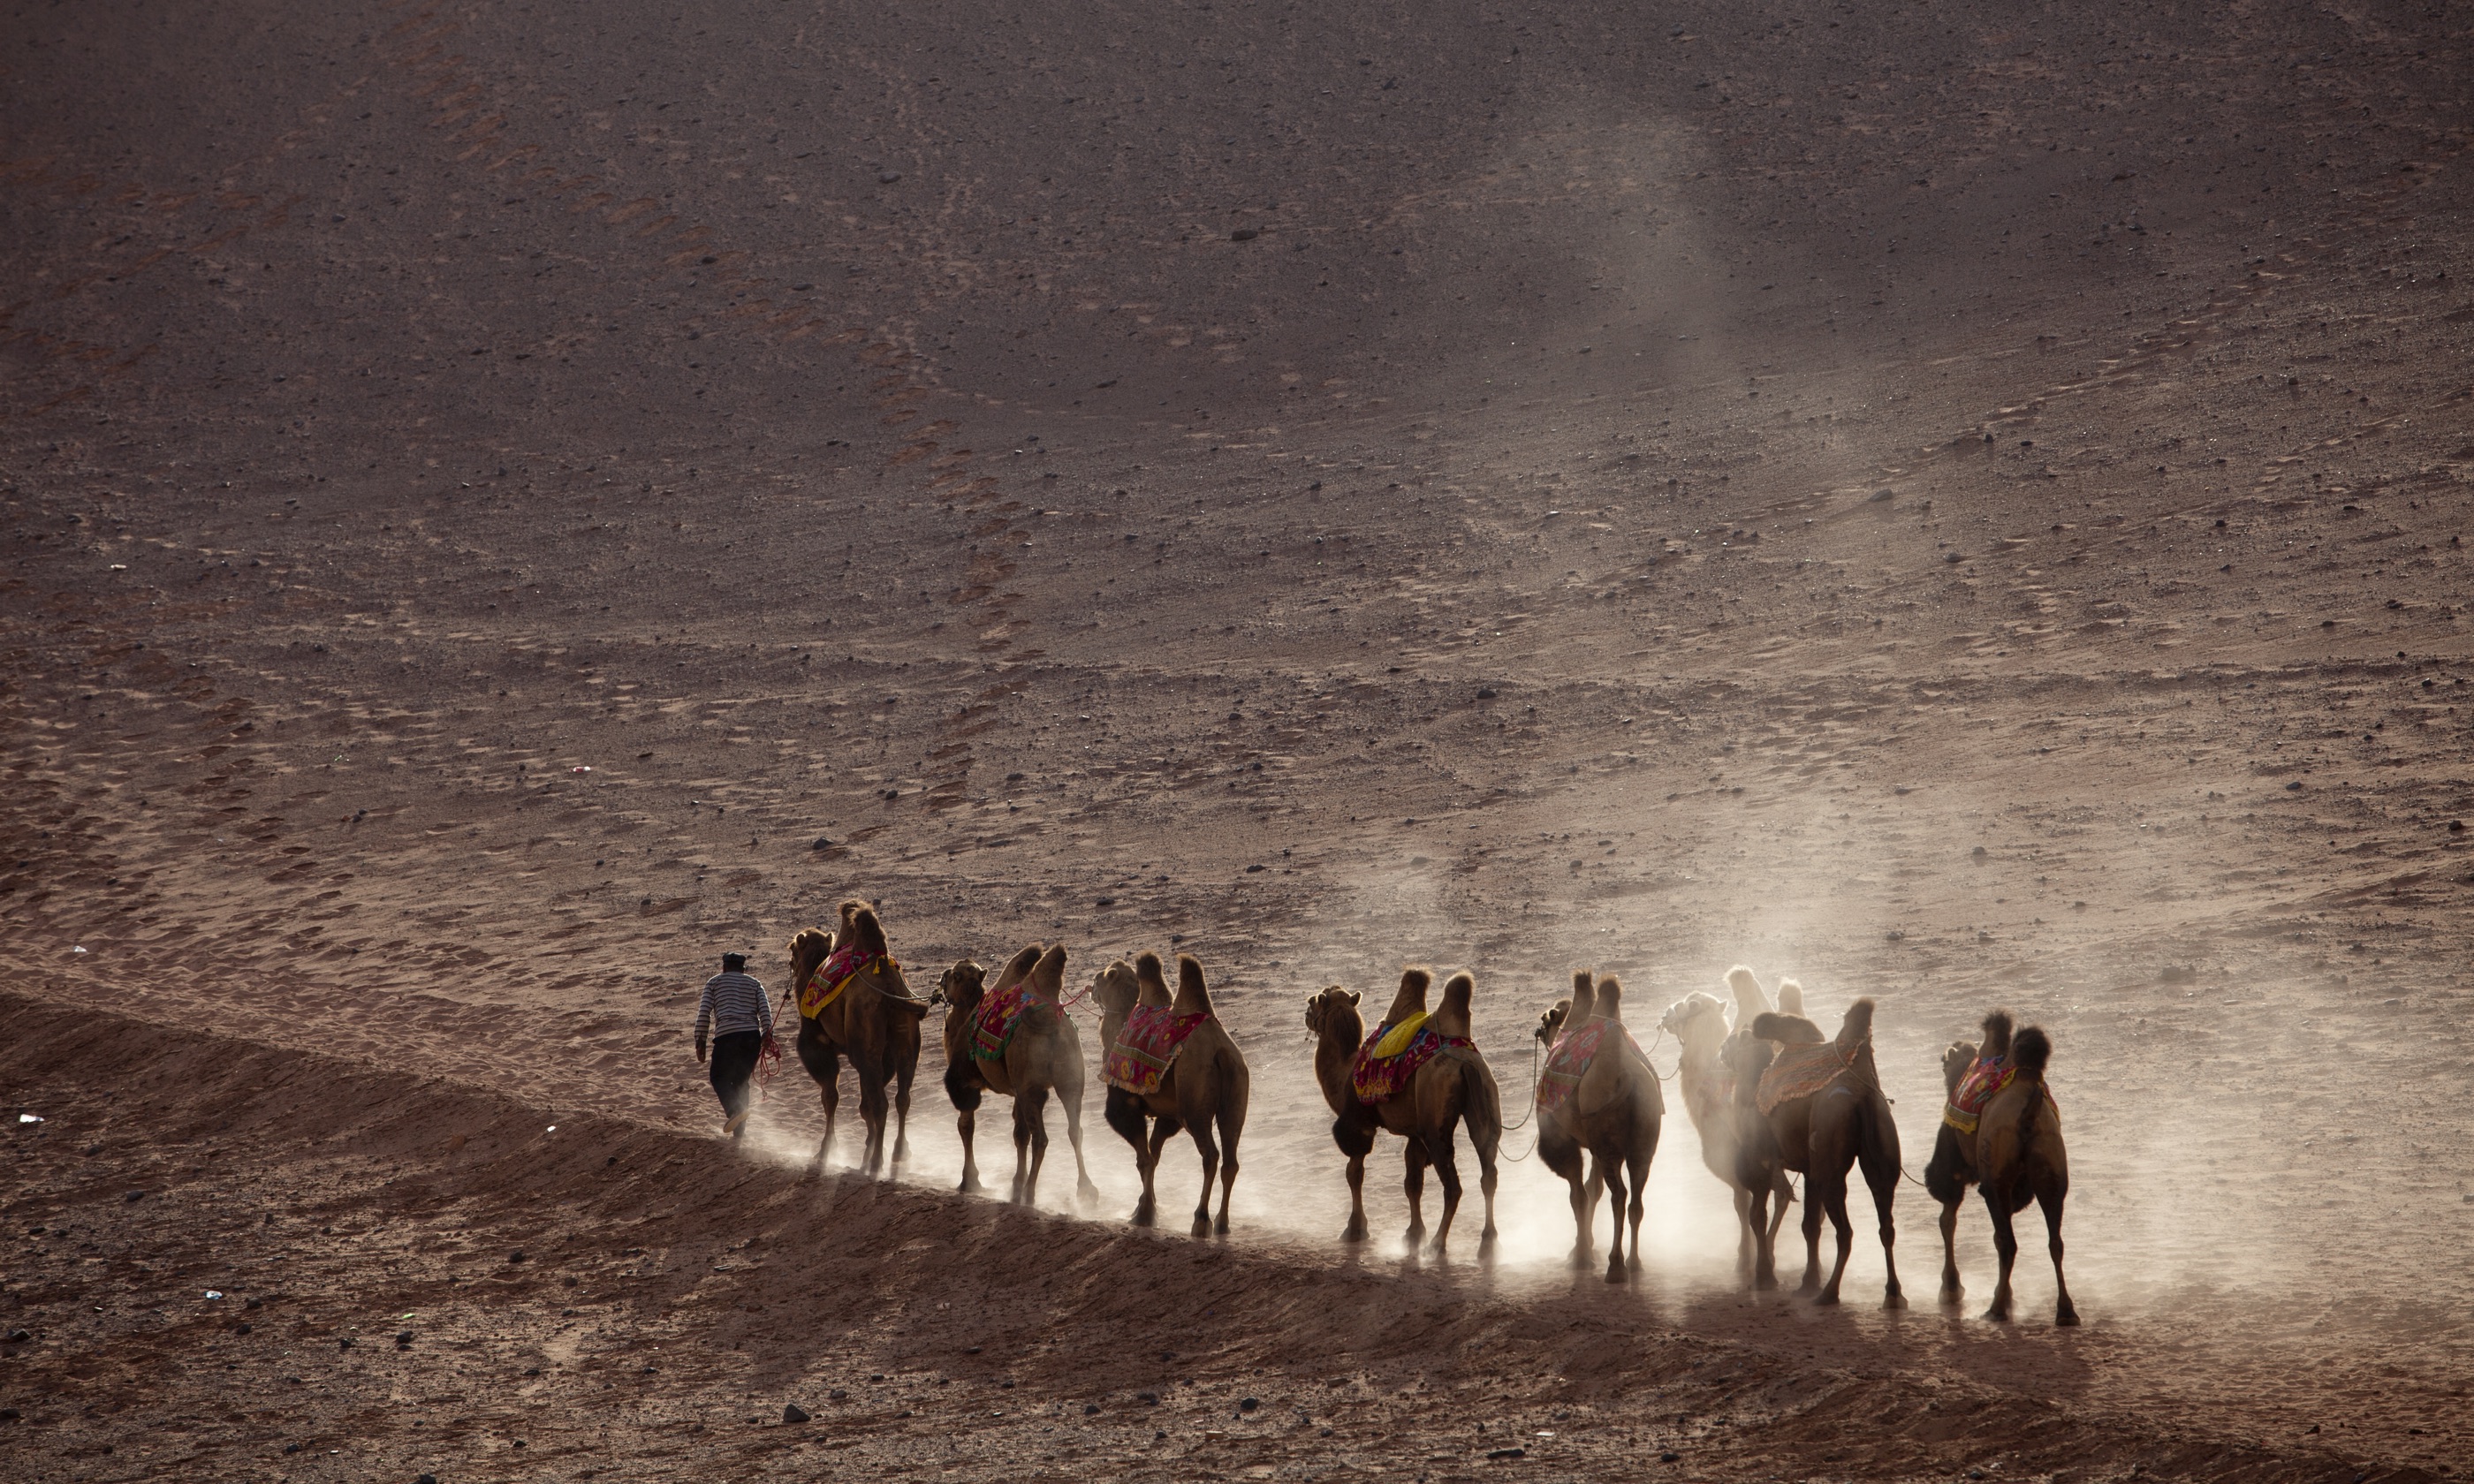 Camels on the Silk Road (Shutterstock: see main credit below)